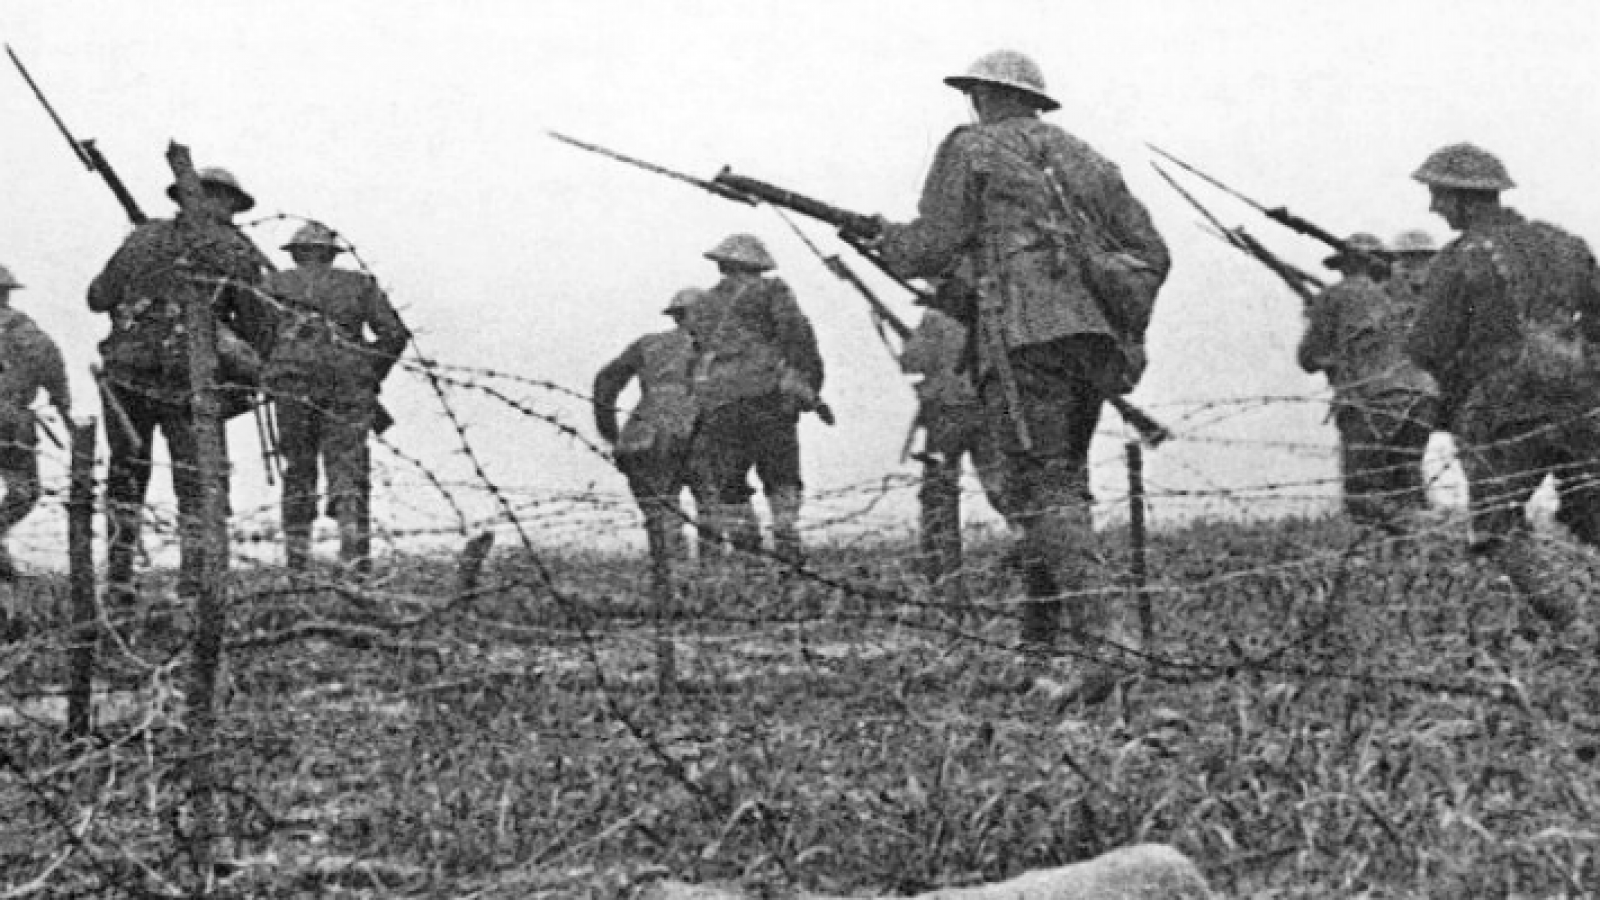 The_Battle_of_the_Somme_film_image1